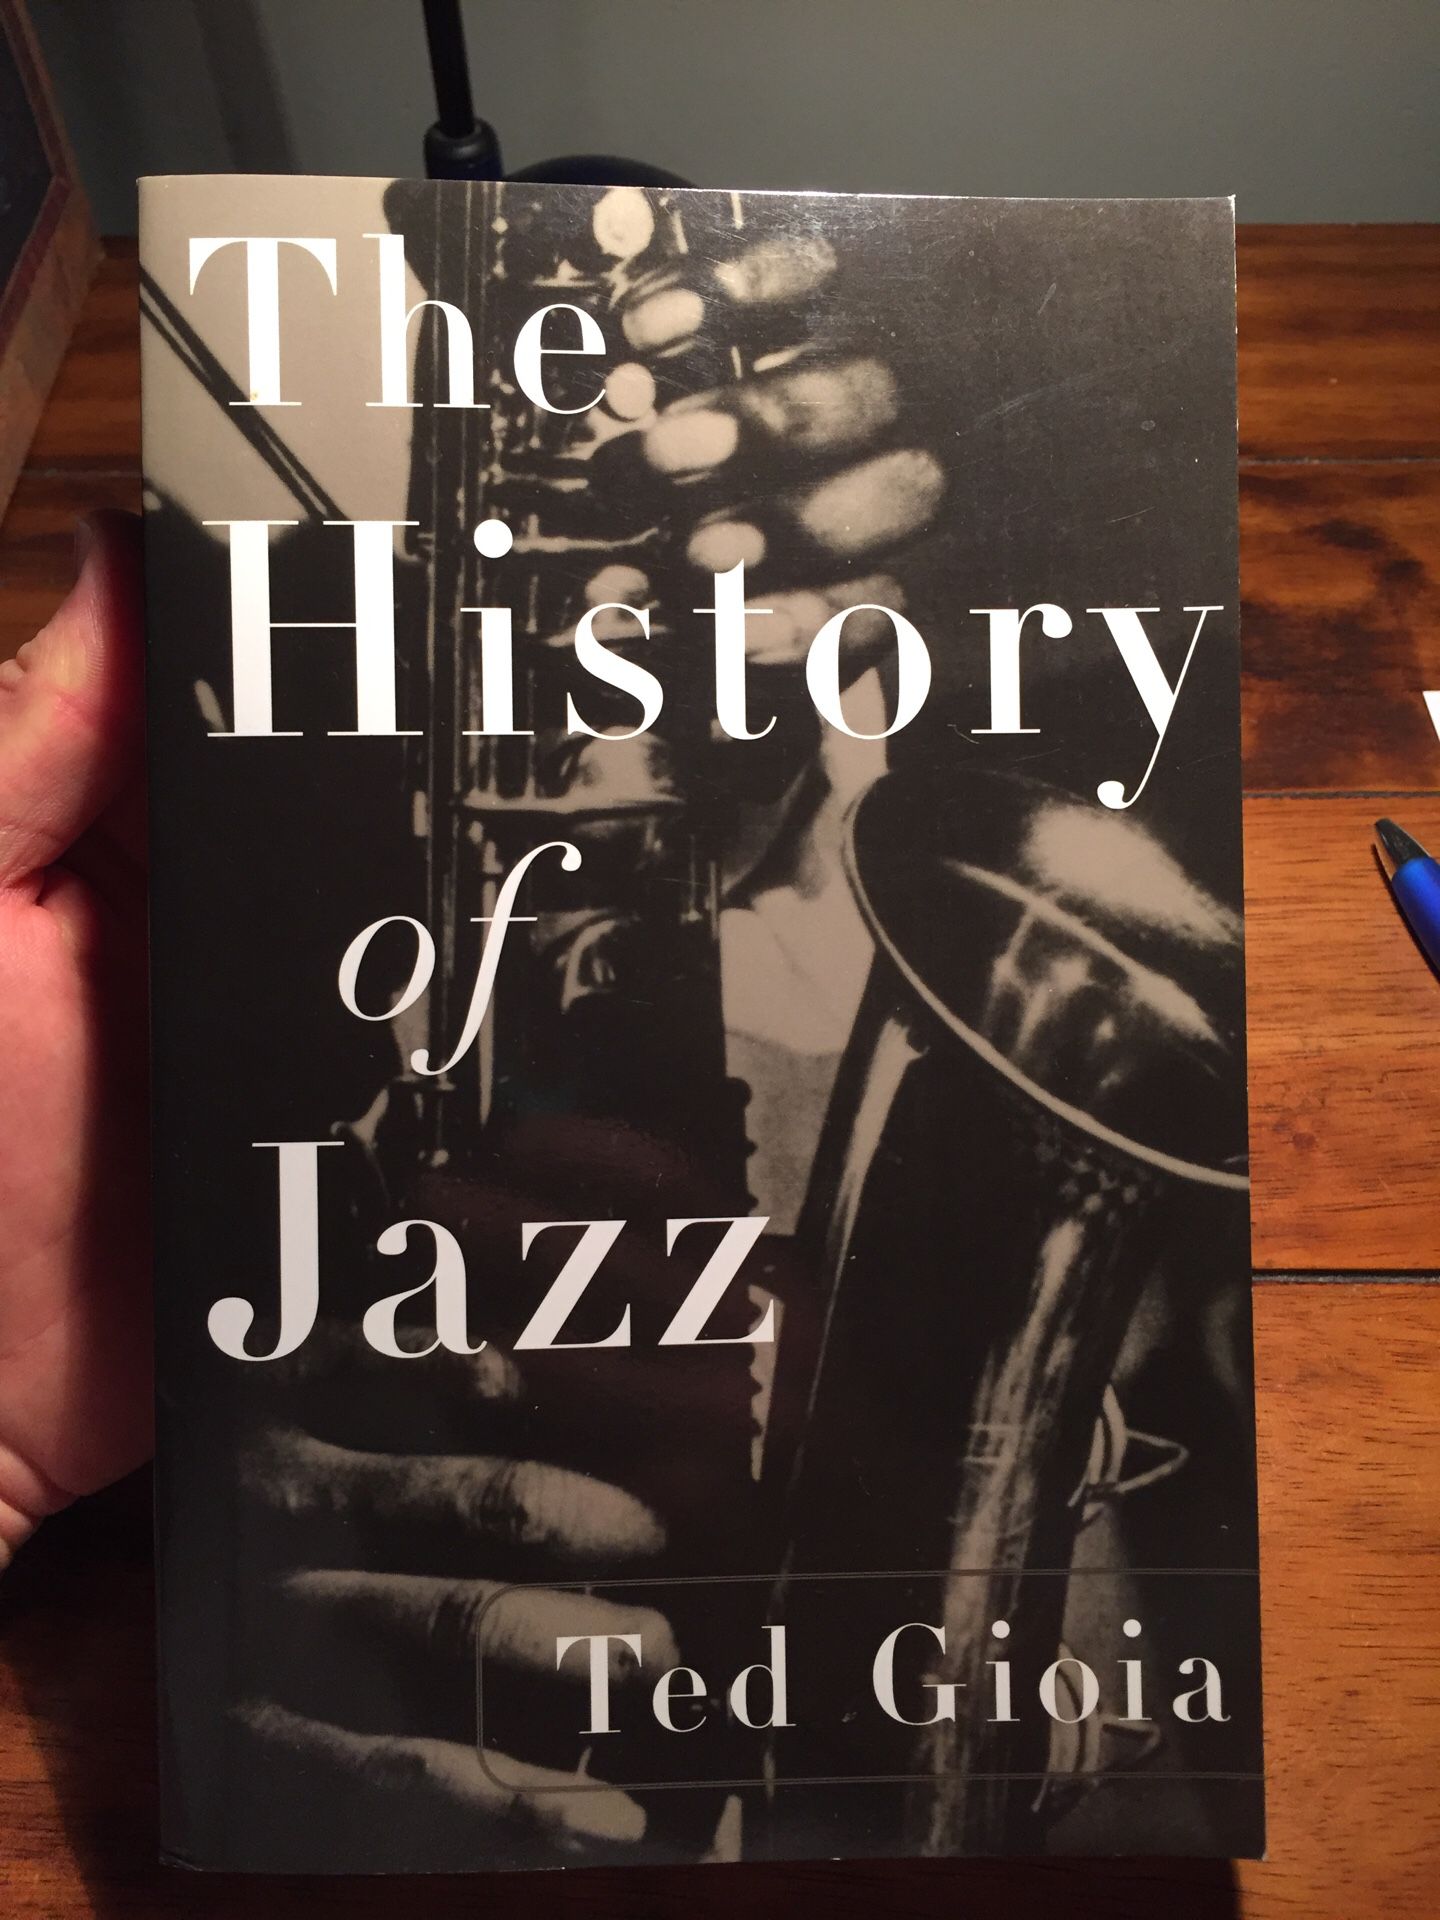 Free history of jazz (ted Gioia) book